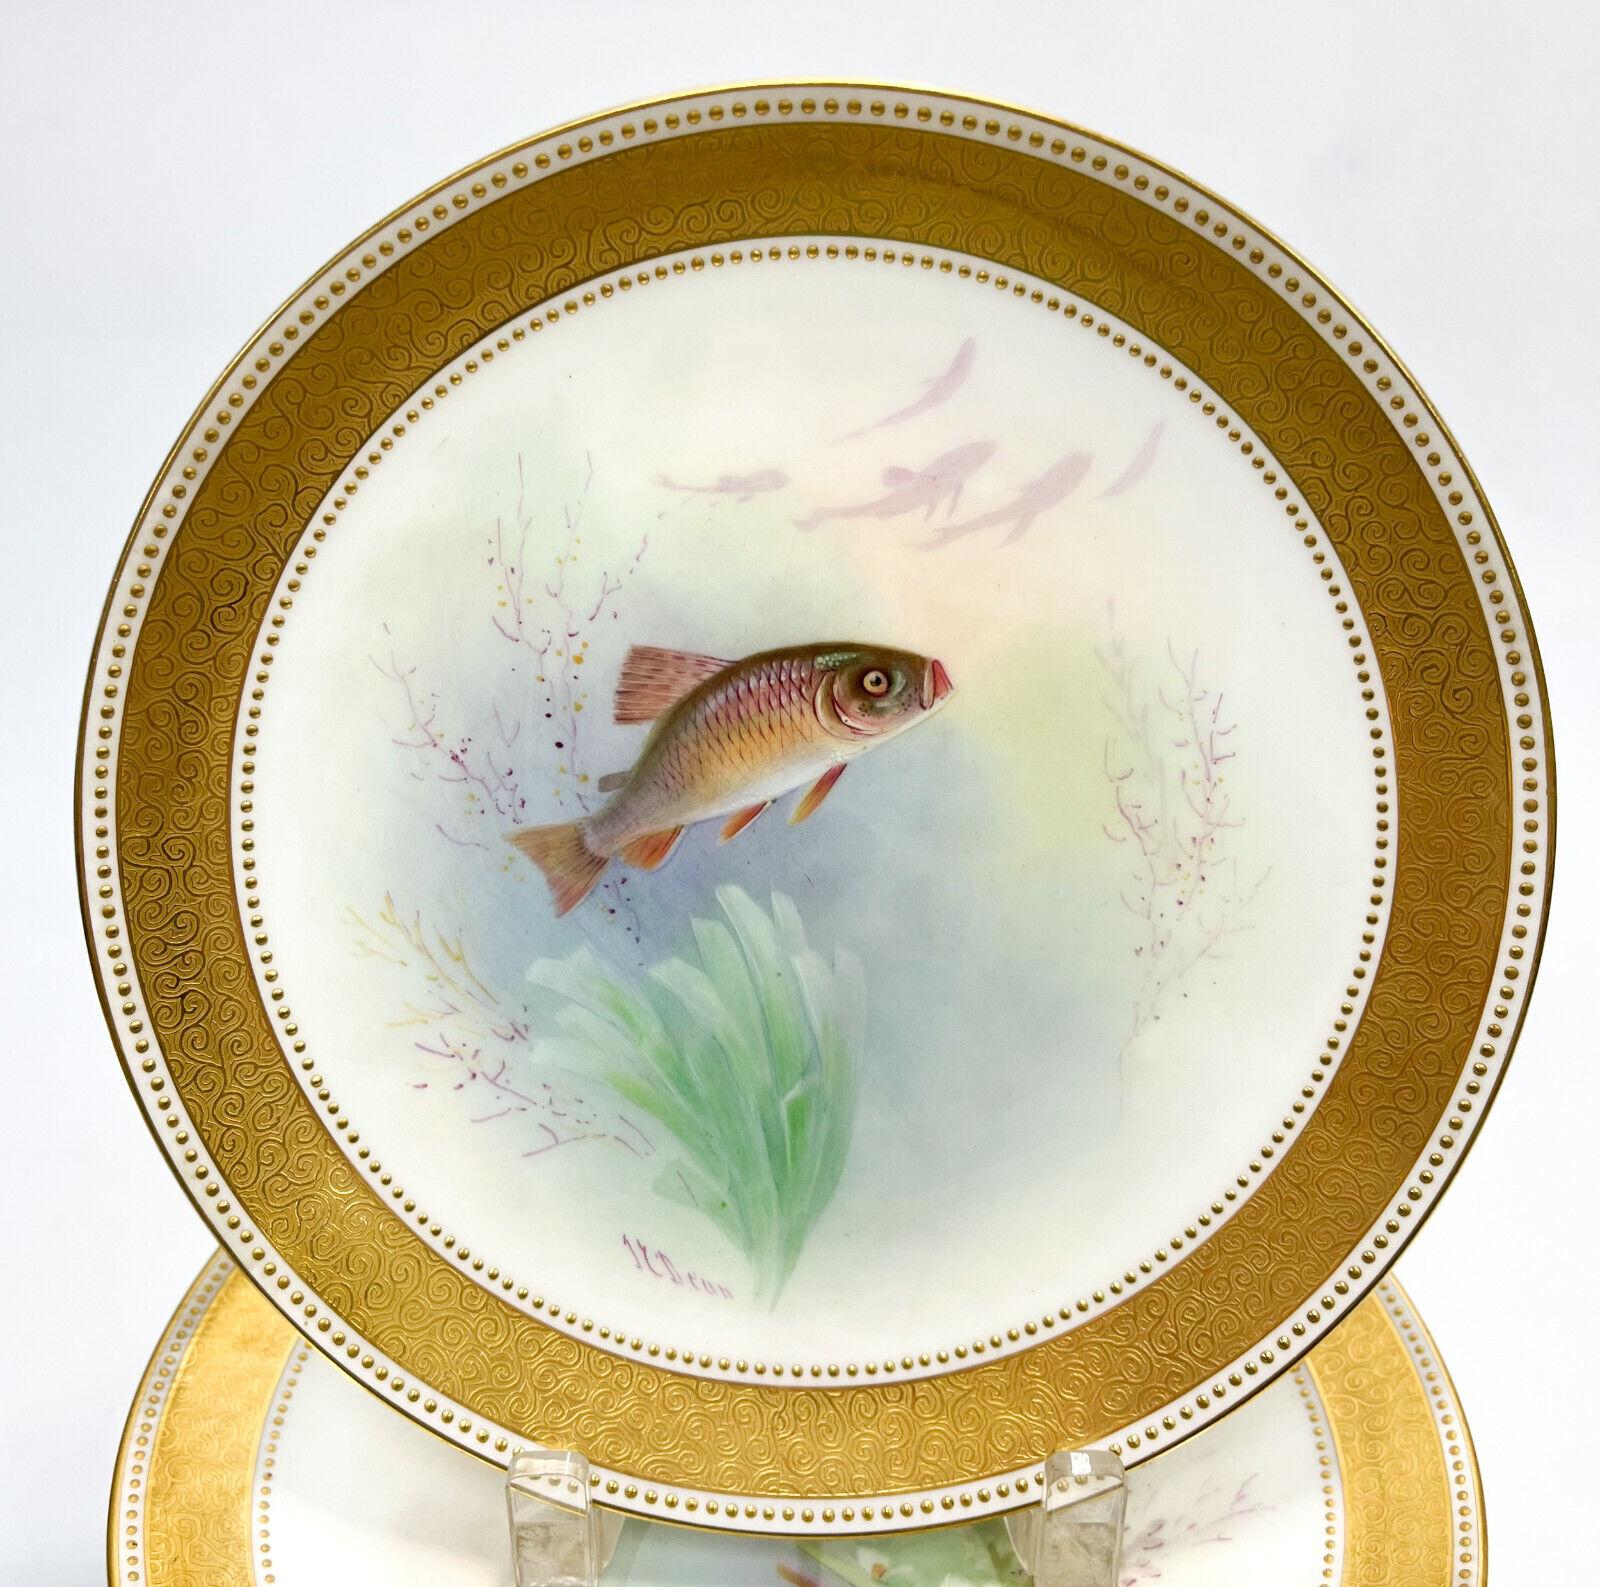 Set of 11 Minton England porcelain hand painted fish cabinet plates, circa 1905

Various hand painted fish to the central area of each plate with a gilt scrolls and beads the rim. Artist signed 